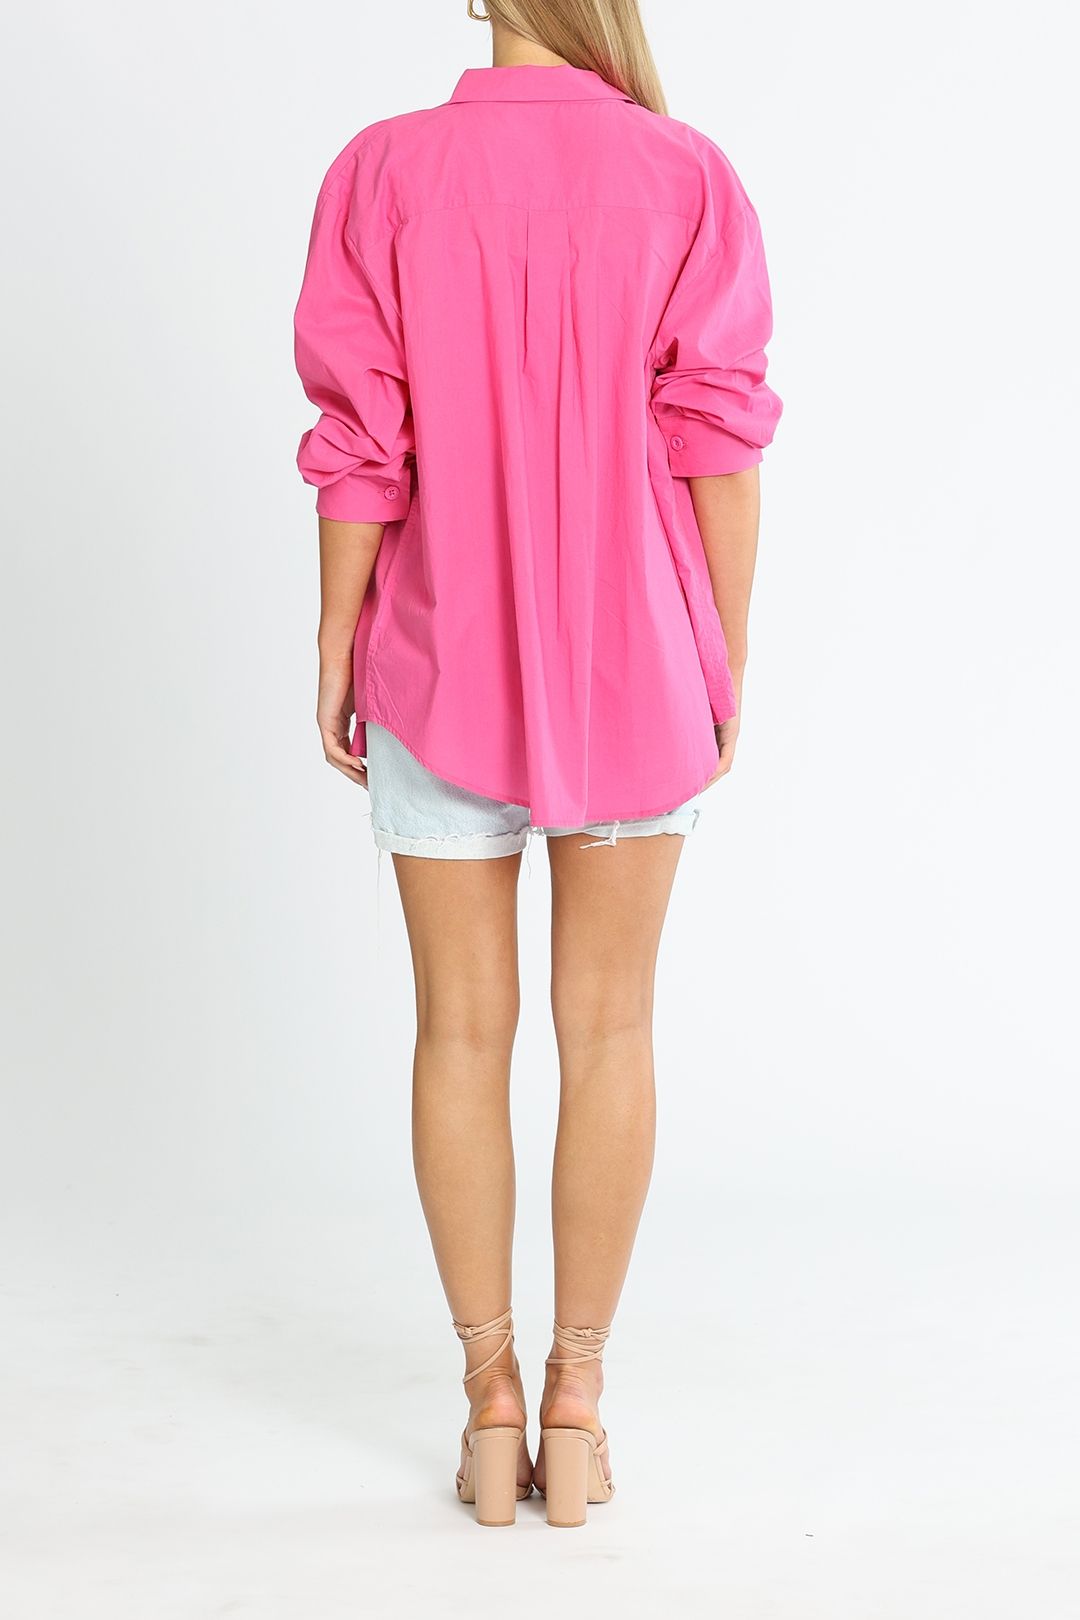 By Johnny Mason Shirt Pink Relaxed Fit